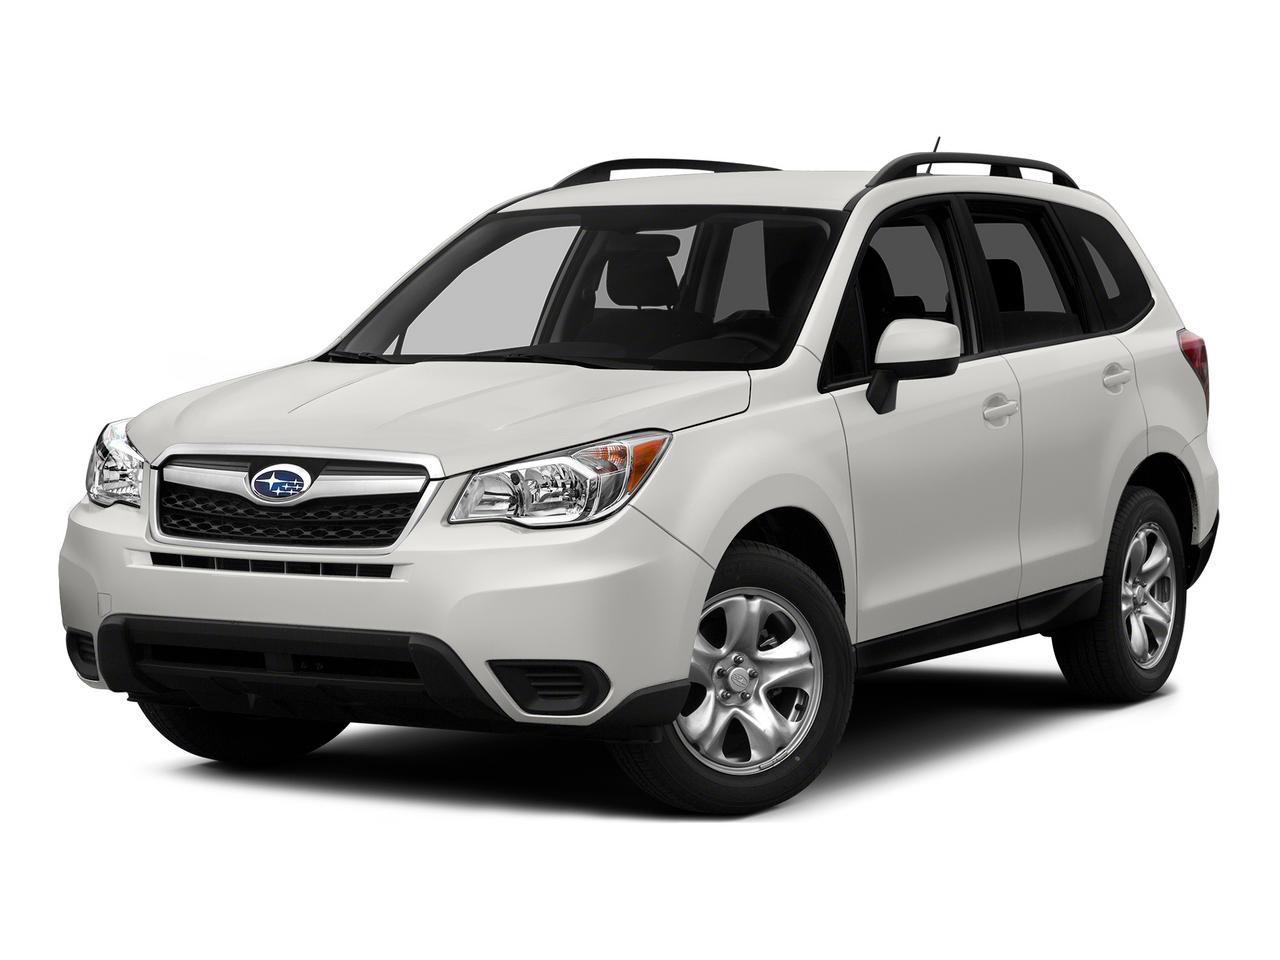 2015 Subaru Forester Vehicle Photo in Pleasant Hills, PA 15236